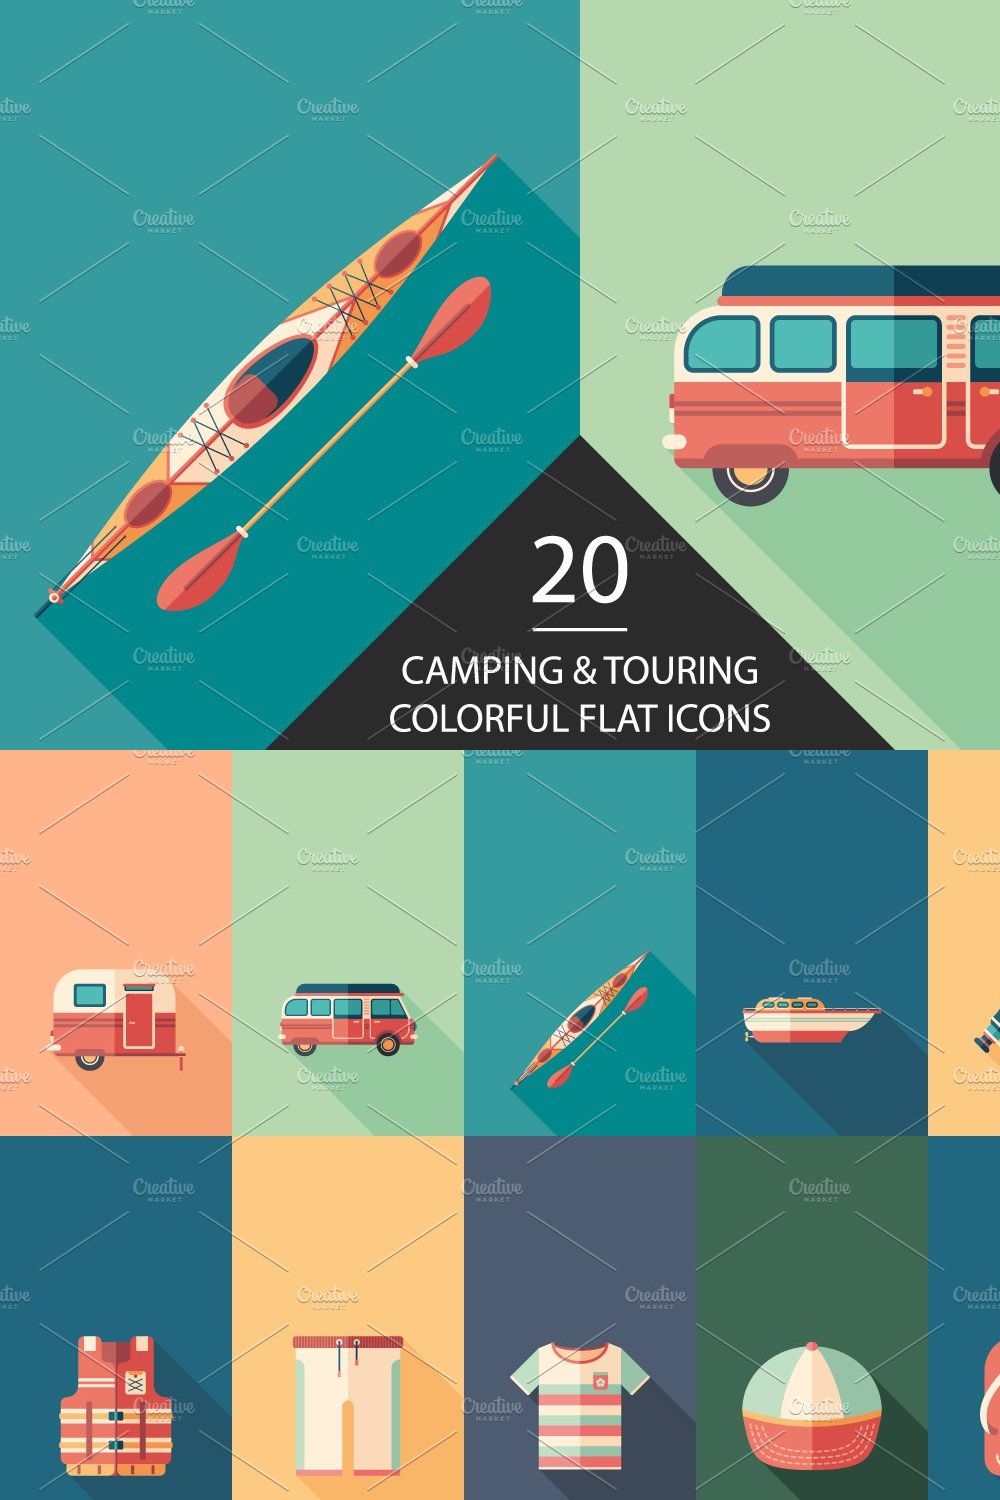 Camping and touring flat icon set pinterest preview image.